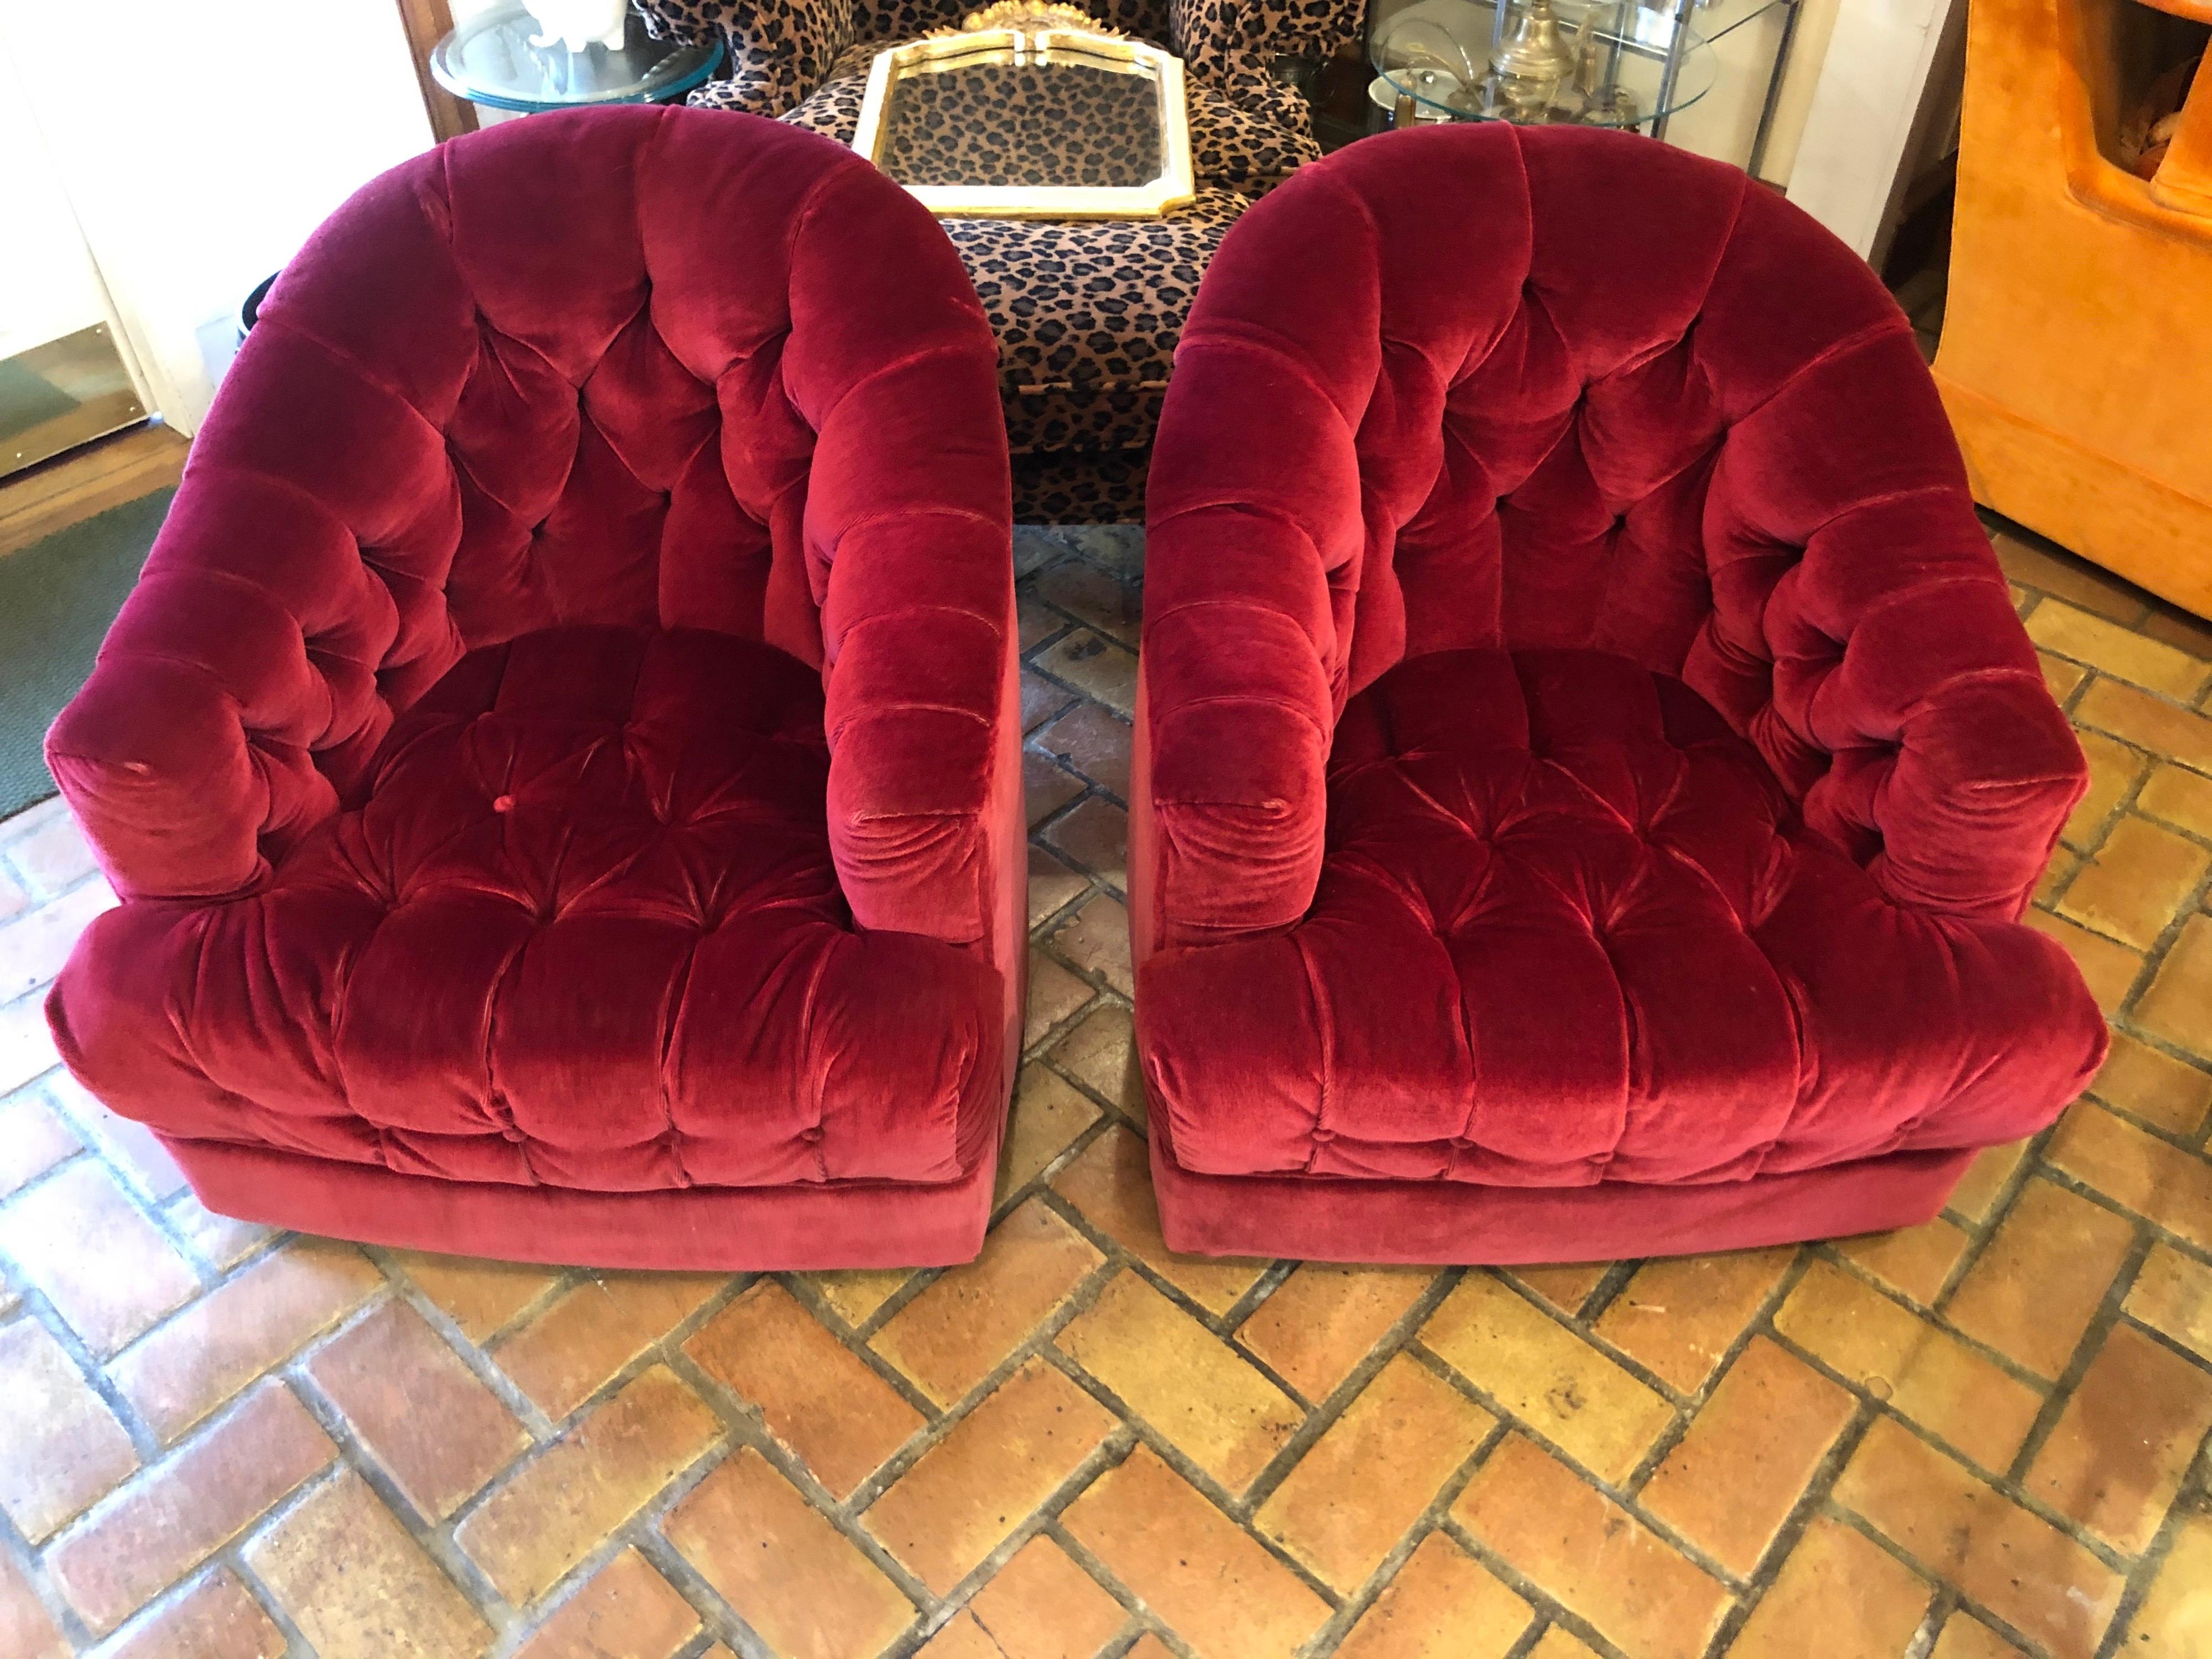 Late 20th Century Pair of Raspberry Mohair Swivel Chairs by Directional